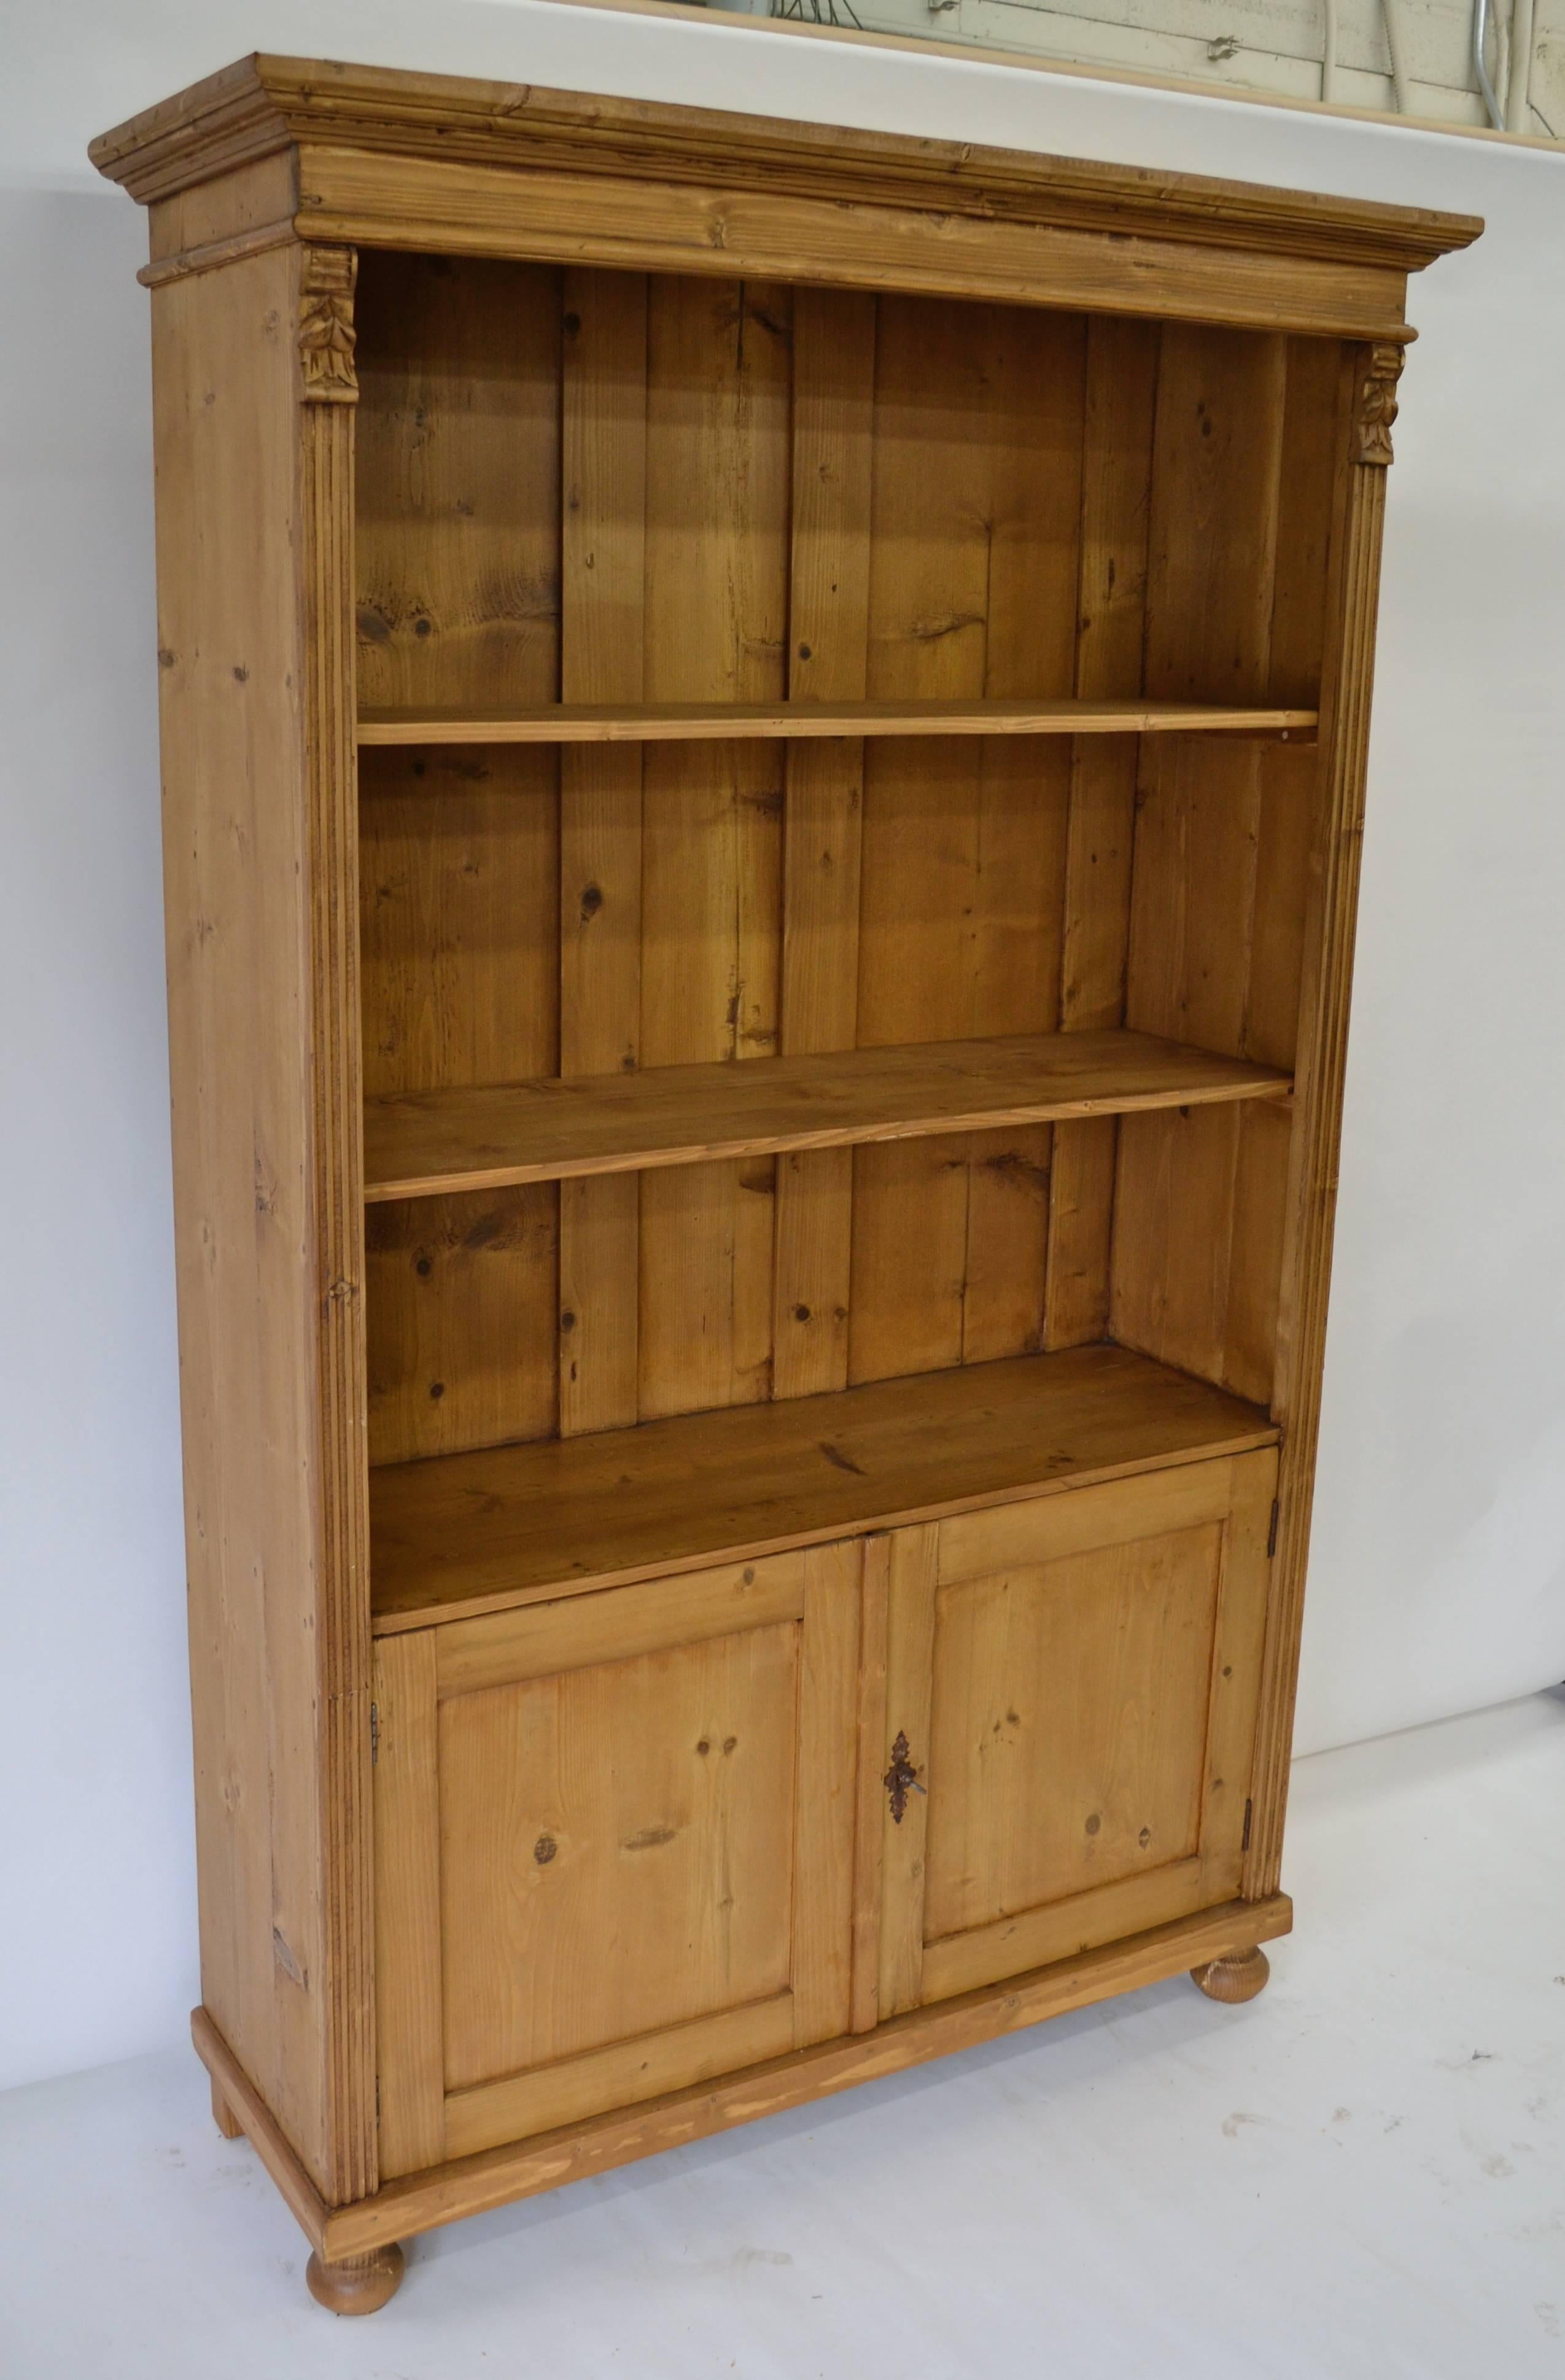 A vintage armoire with broken doors provided the shell of this bookcase, with one side board removed to reduce the depth and the doors rebuilt half-size. All the old features and the deep rich color remain.